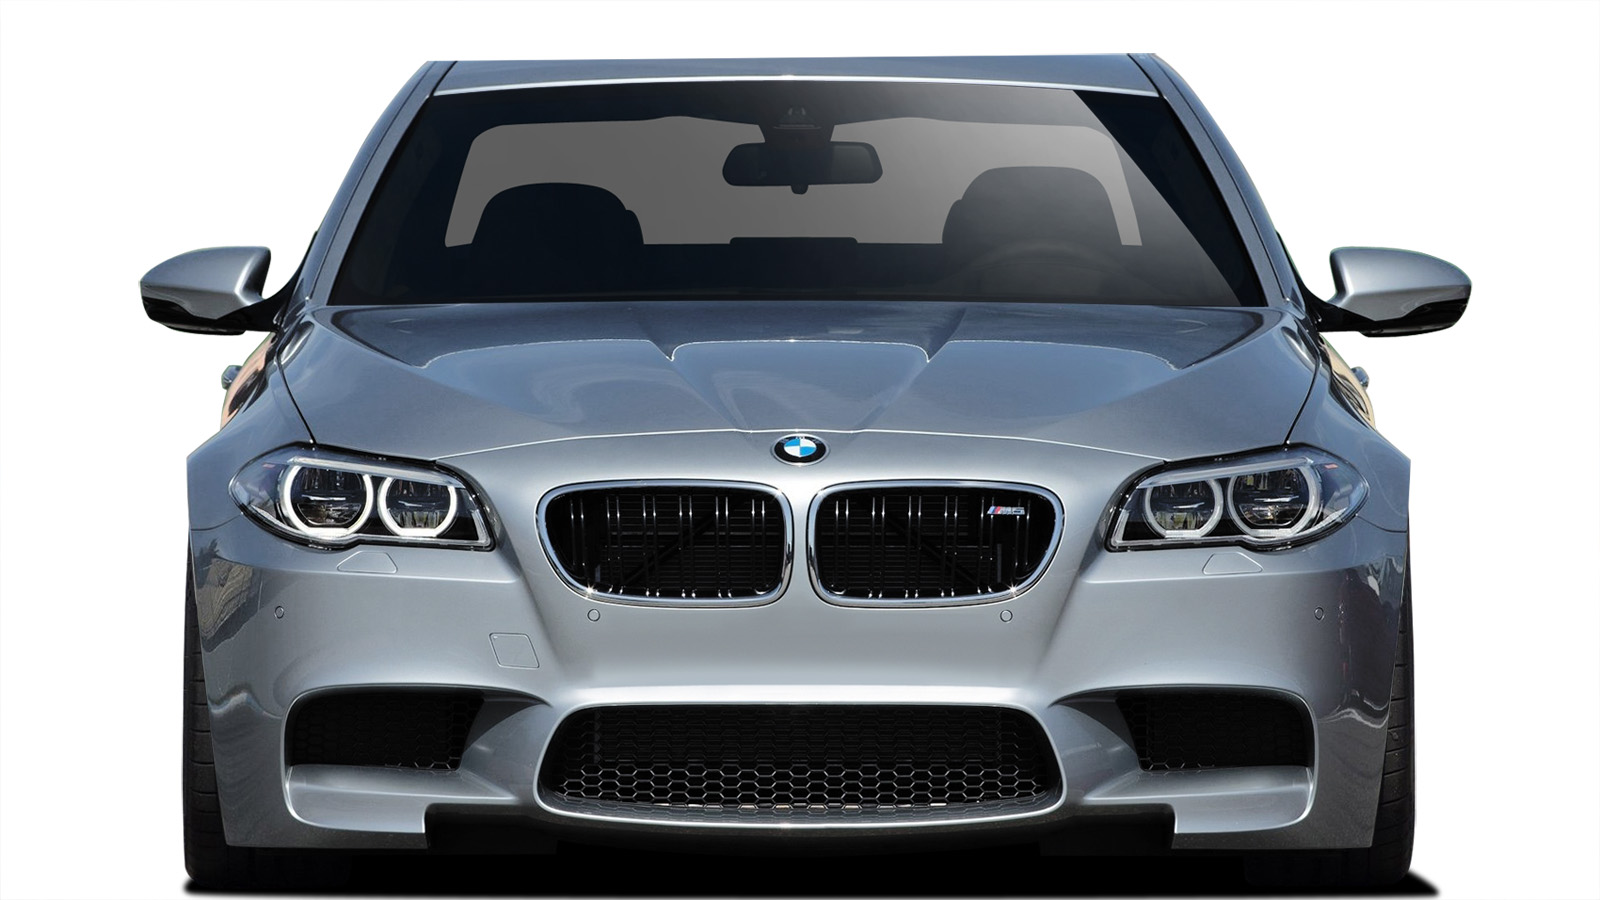 Front Bumper Bodykit for 2013 BMW 5 Series ALL - BMW 5 Series F10 Vaero M5 Look Conversion Front Bumper Cover ( with PDC , with Washer , with Camera